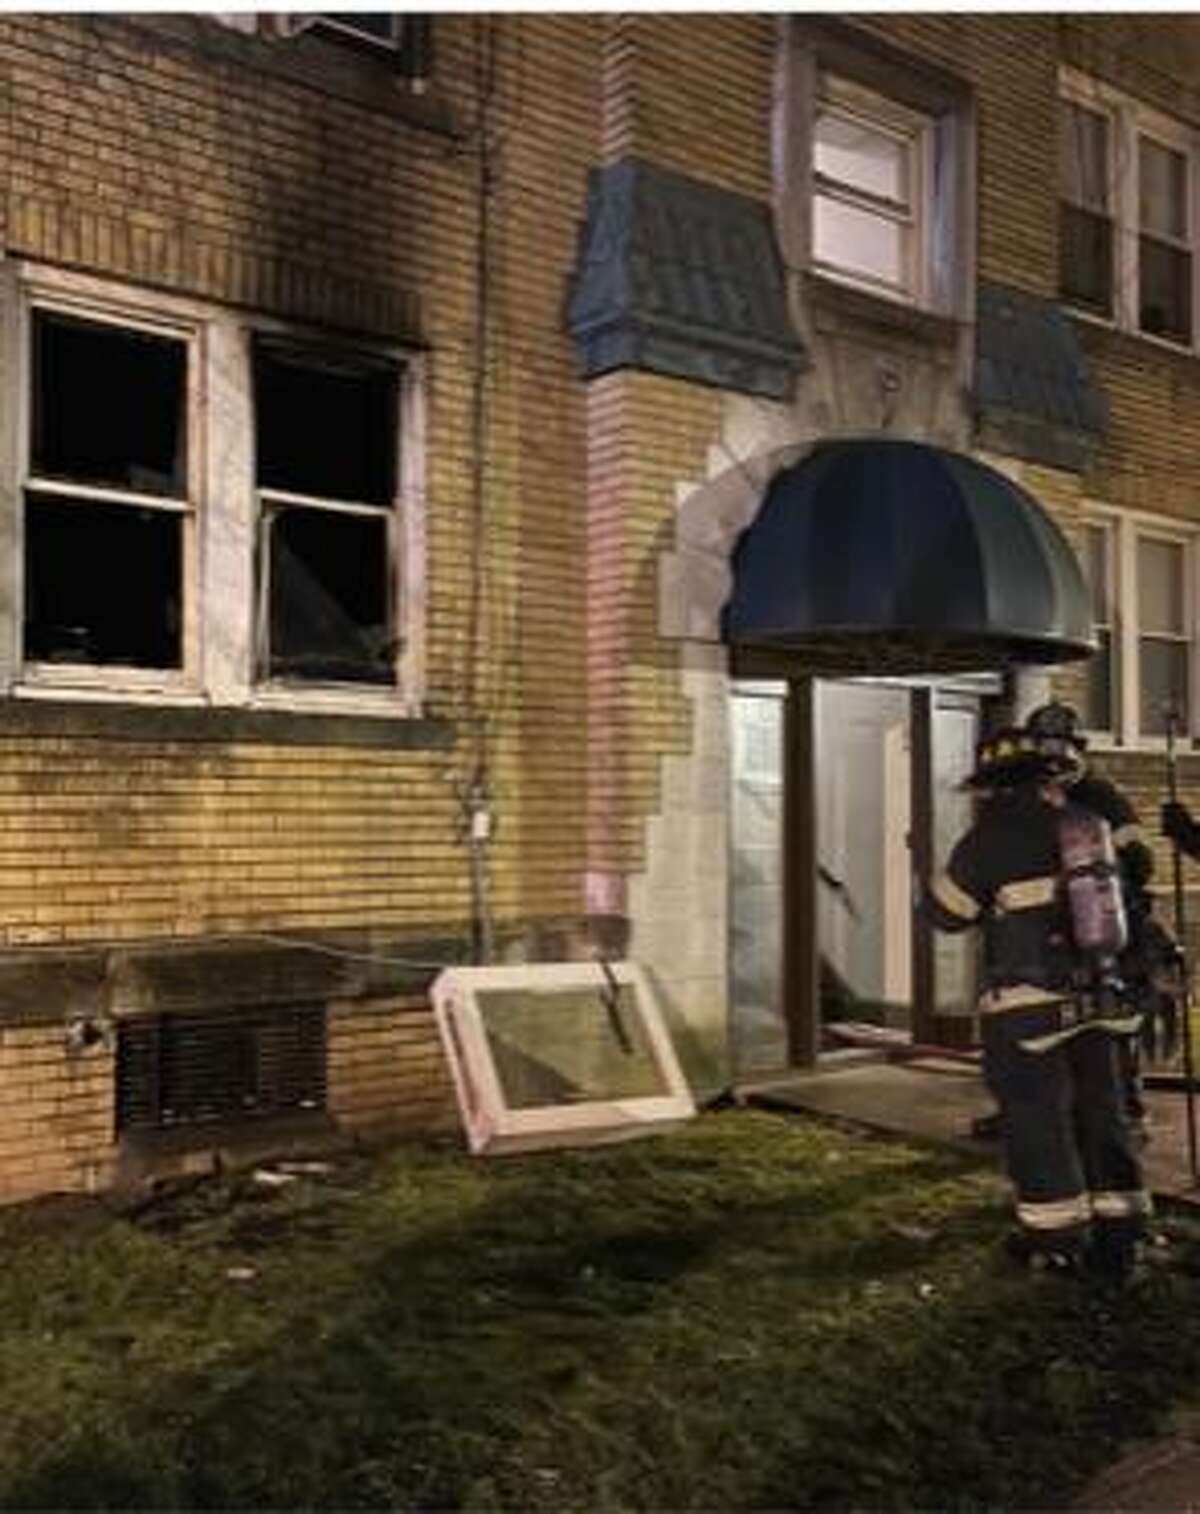 Two people were displaced by a fire on Spring Street in Hartford Wednesday, a fire official said. No one was injured.